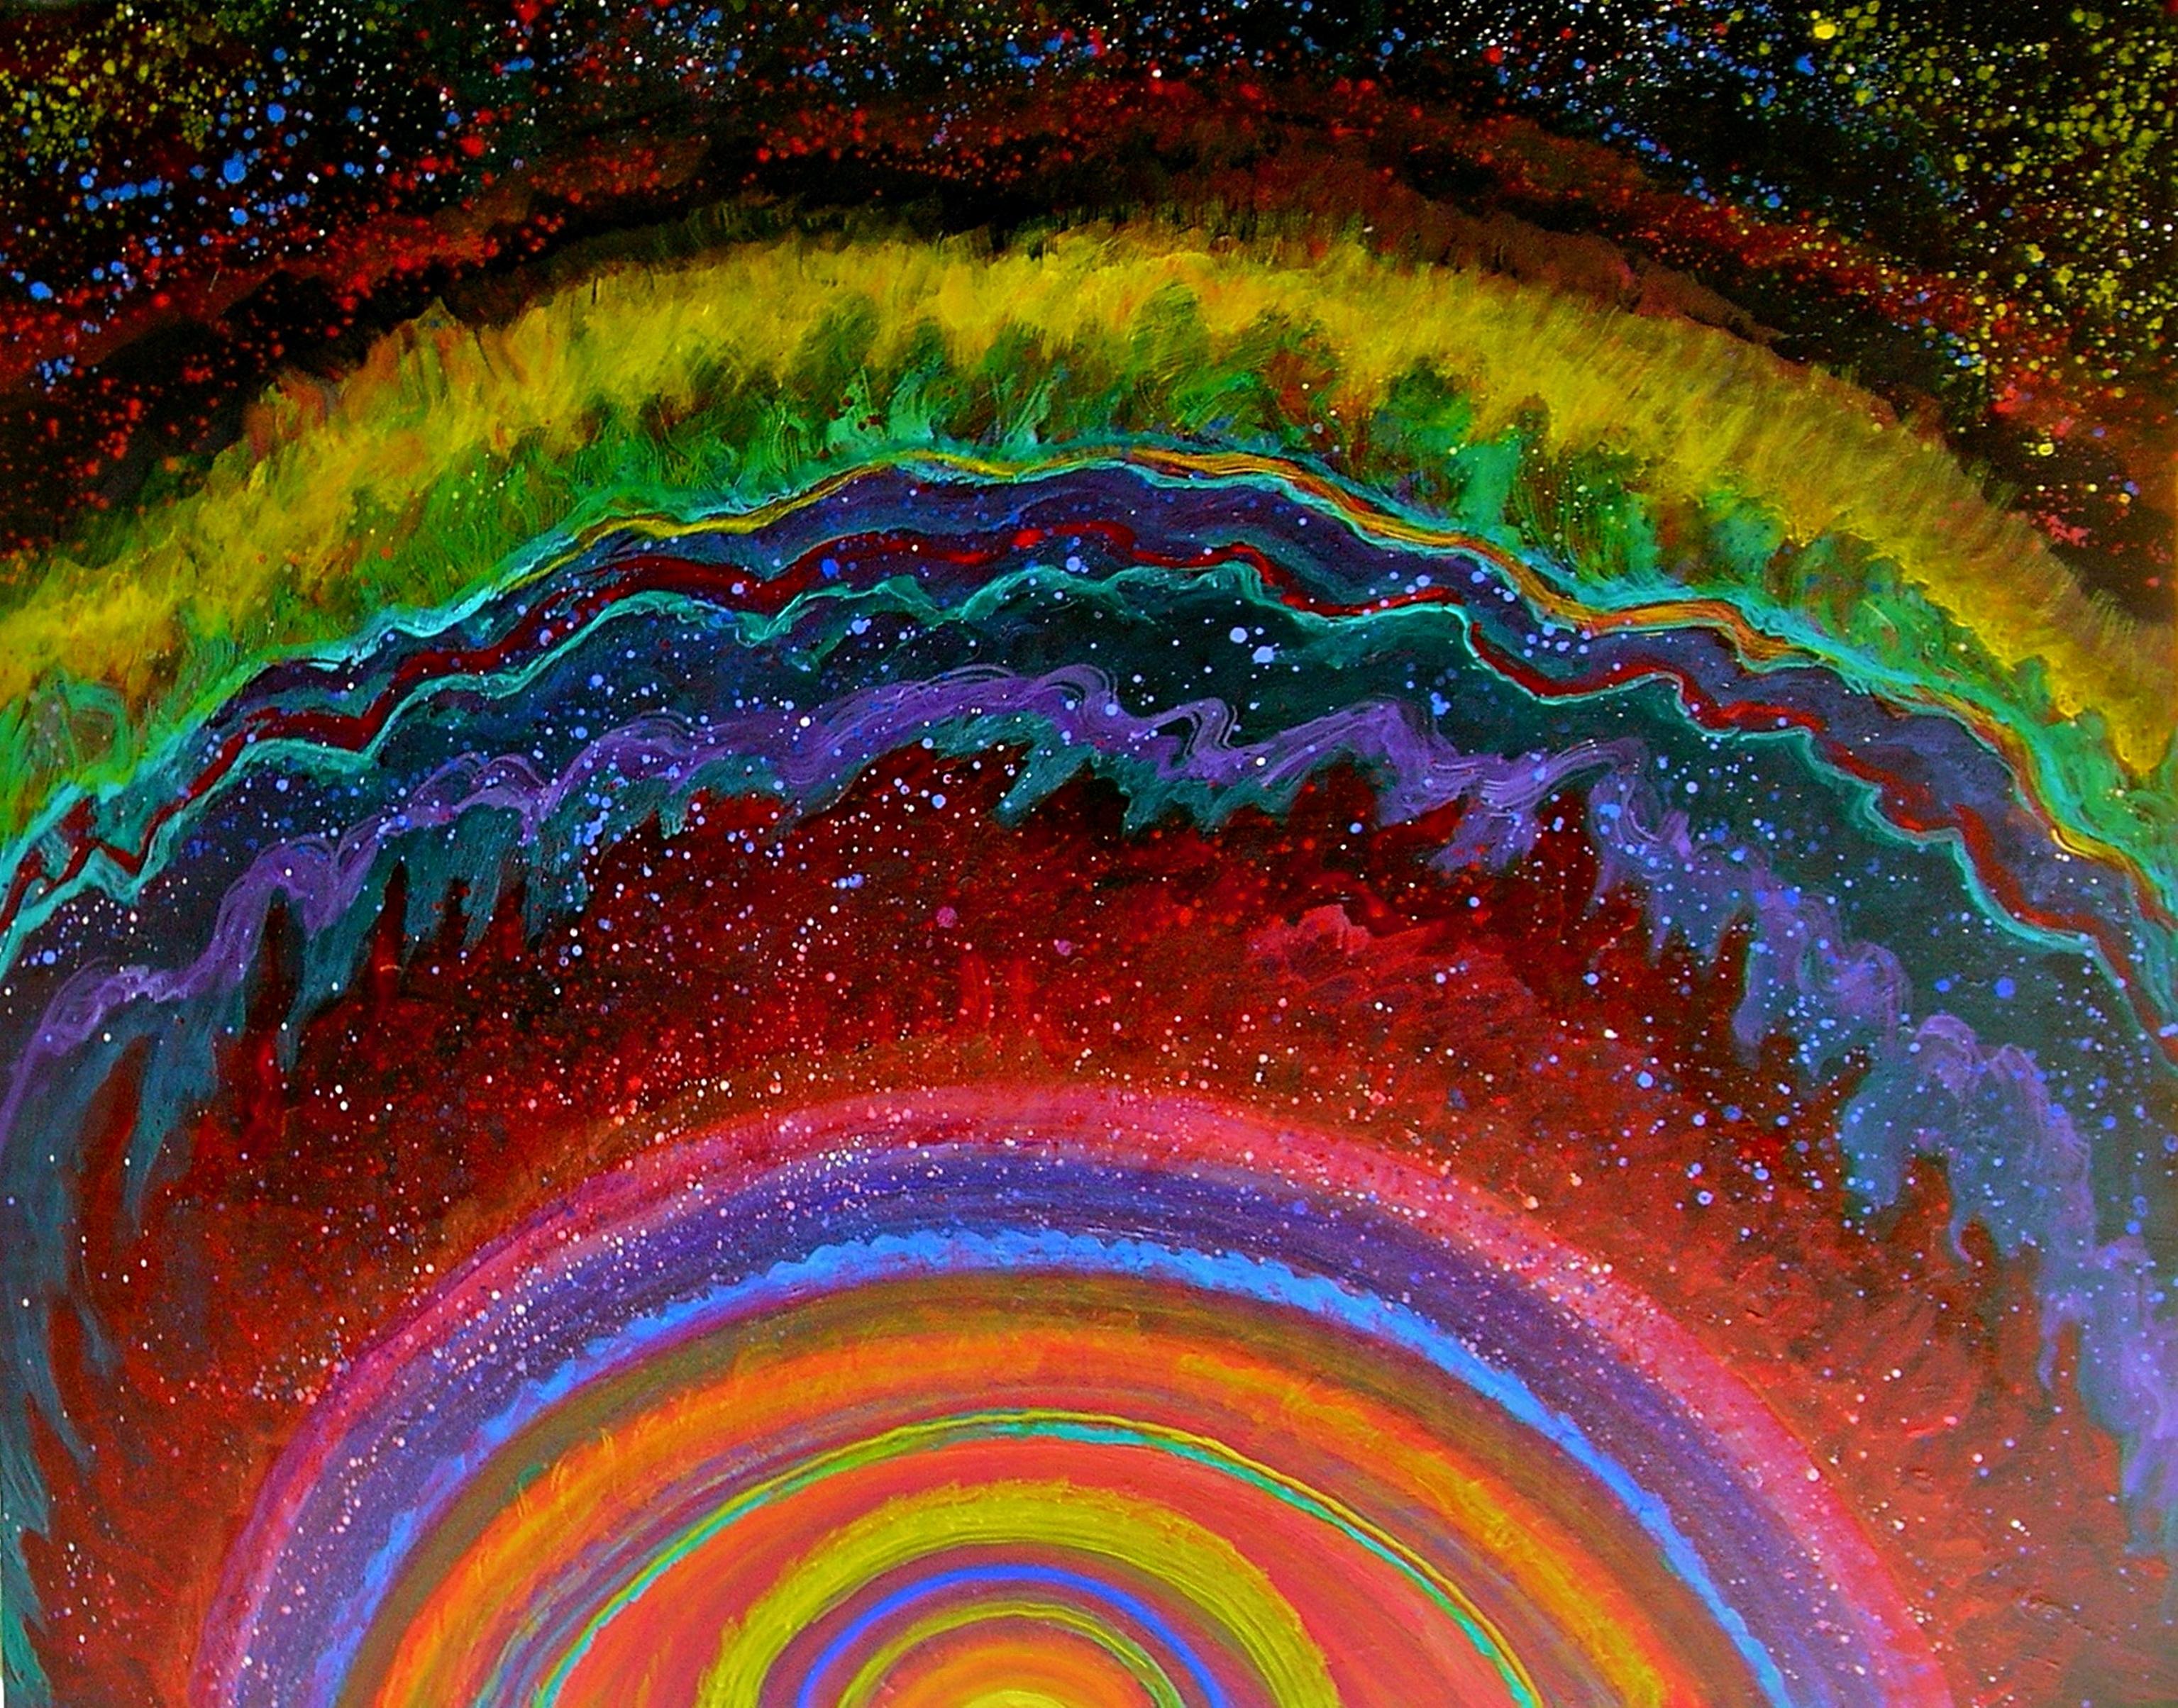 Thelma Appel
Gravity's Rainbow, 2010
Acrylic on Canvas
Hand Signed, Titled & Dated on the back of canvas
48 × 60 inches
Unframed
Thelma Appel was the subject of a 50 year career survey at the Brattleboro Museum in Vermont from October, 2019 to